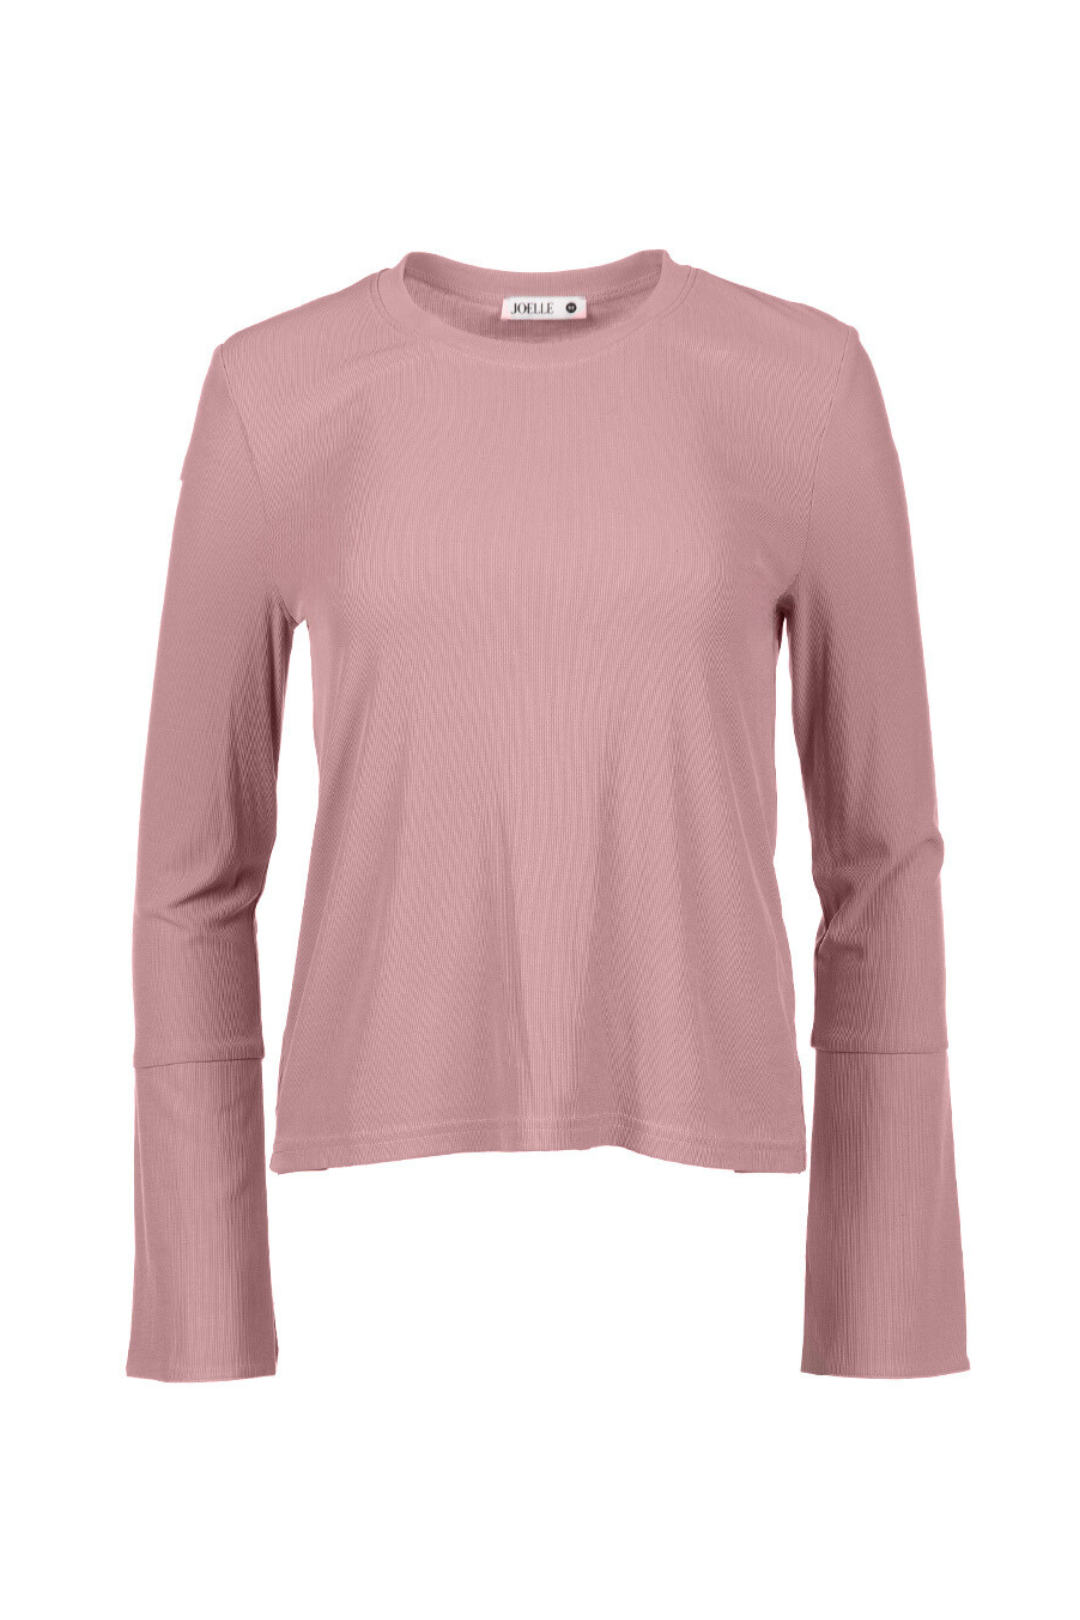 Long Sleeve Fitted Pink Sweater | Myra